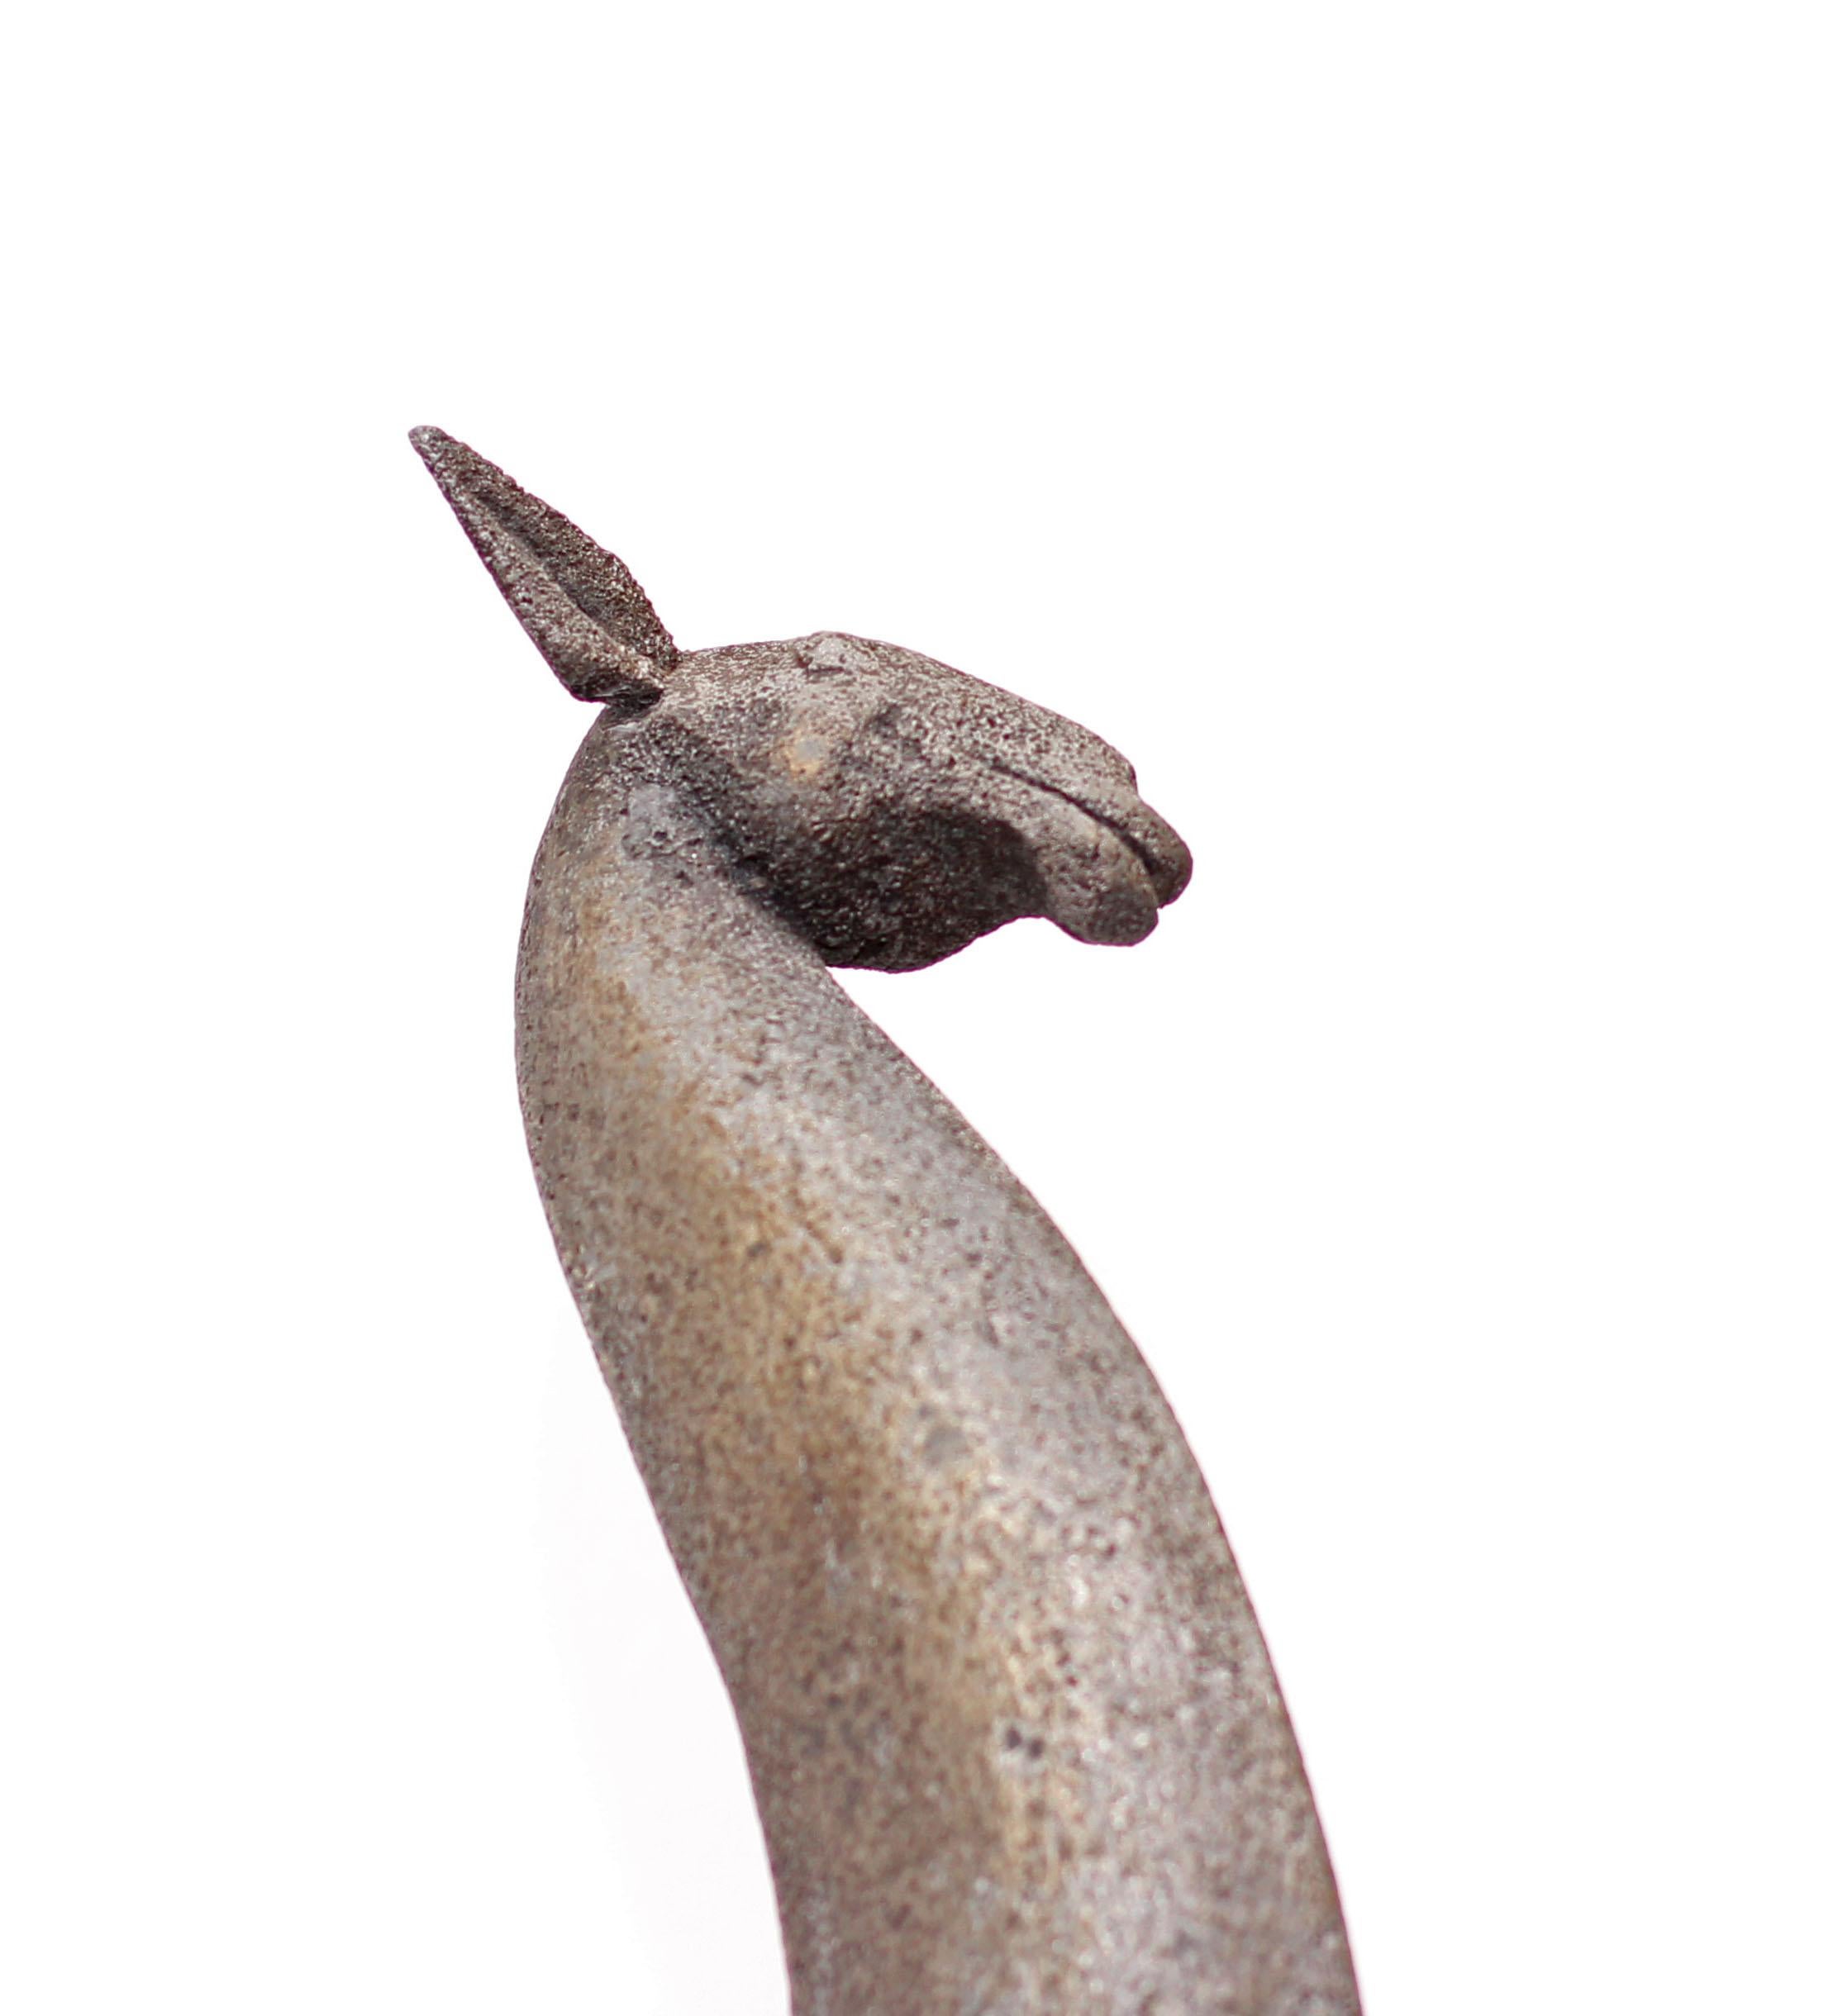 A large and early sand cast aluminum modernist sculpture of a giraffe by Cuban American artist Manuel Carbonell. Pedestal included. Measures: Height is 73” with base.
Carbonell’s early sculptures where sand cast and unique. This is an edition of